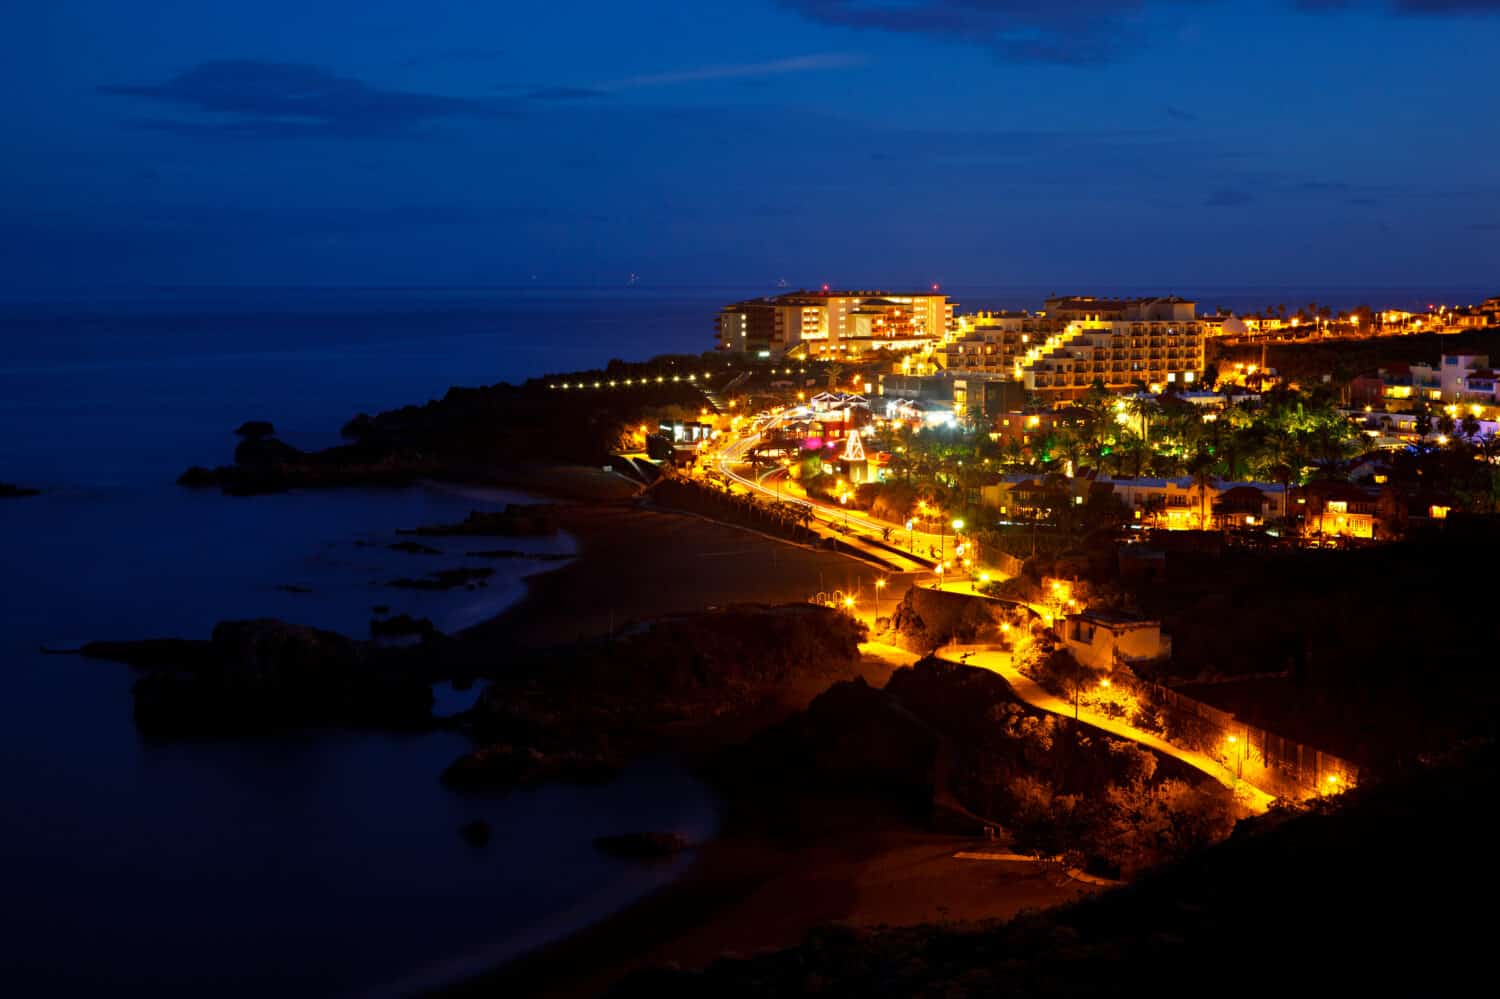 View to the hotel village of Los Cancajos in La Palma shortly after sunset.